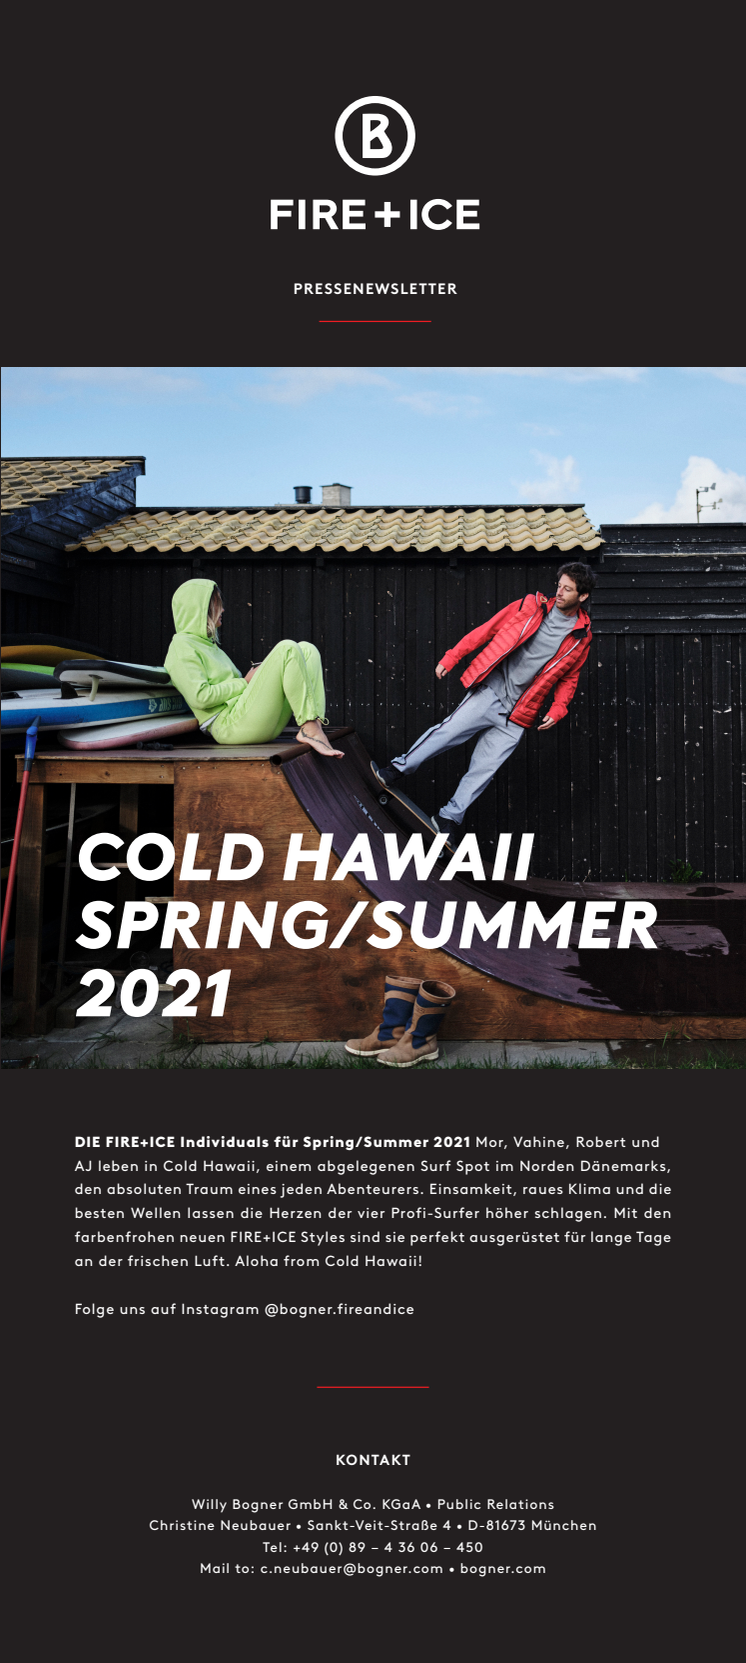 FIRE+ICE Spring/Summer 2021: Cold Hawaii